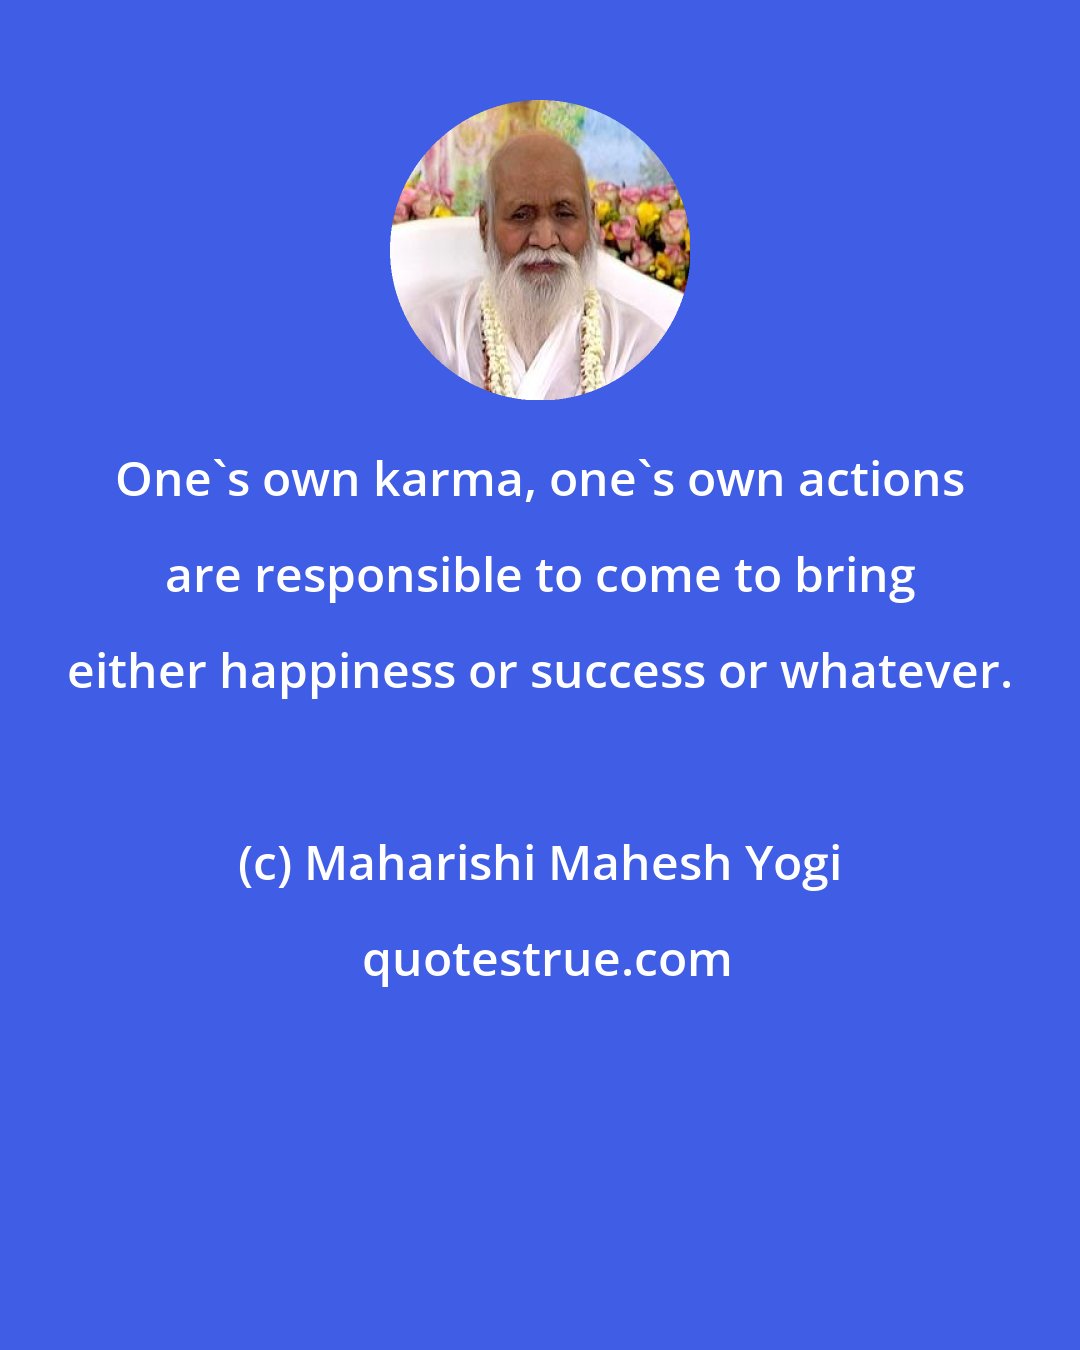 Maharishi Mahesh Yogi: One's own karma, one's own actions are responsible to come to bring either happiness or success or whatever.